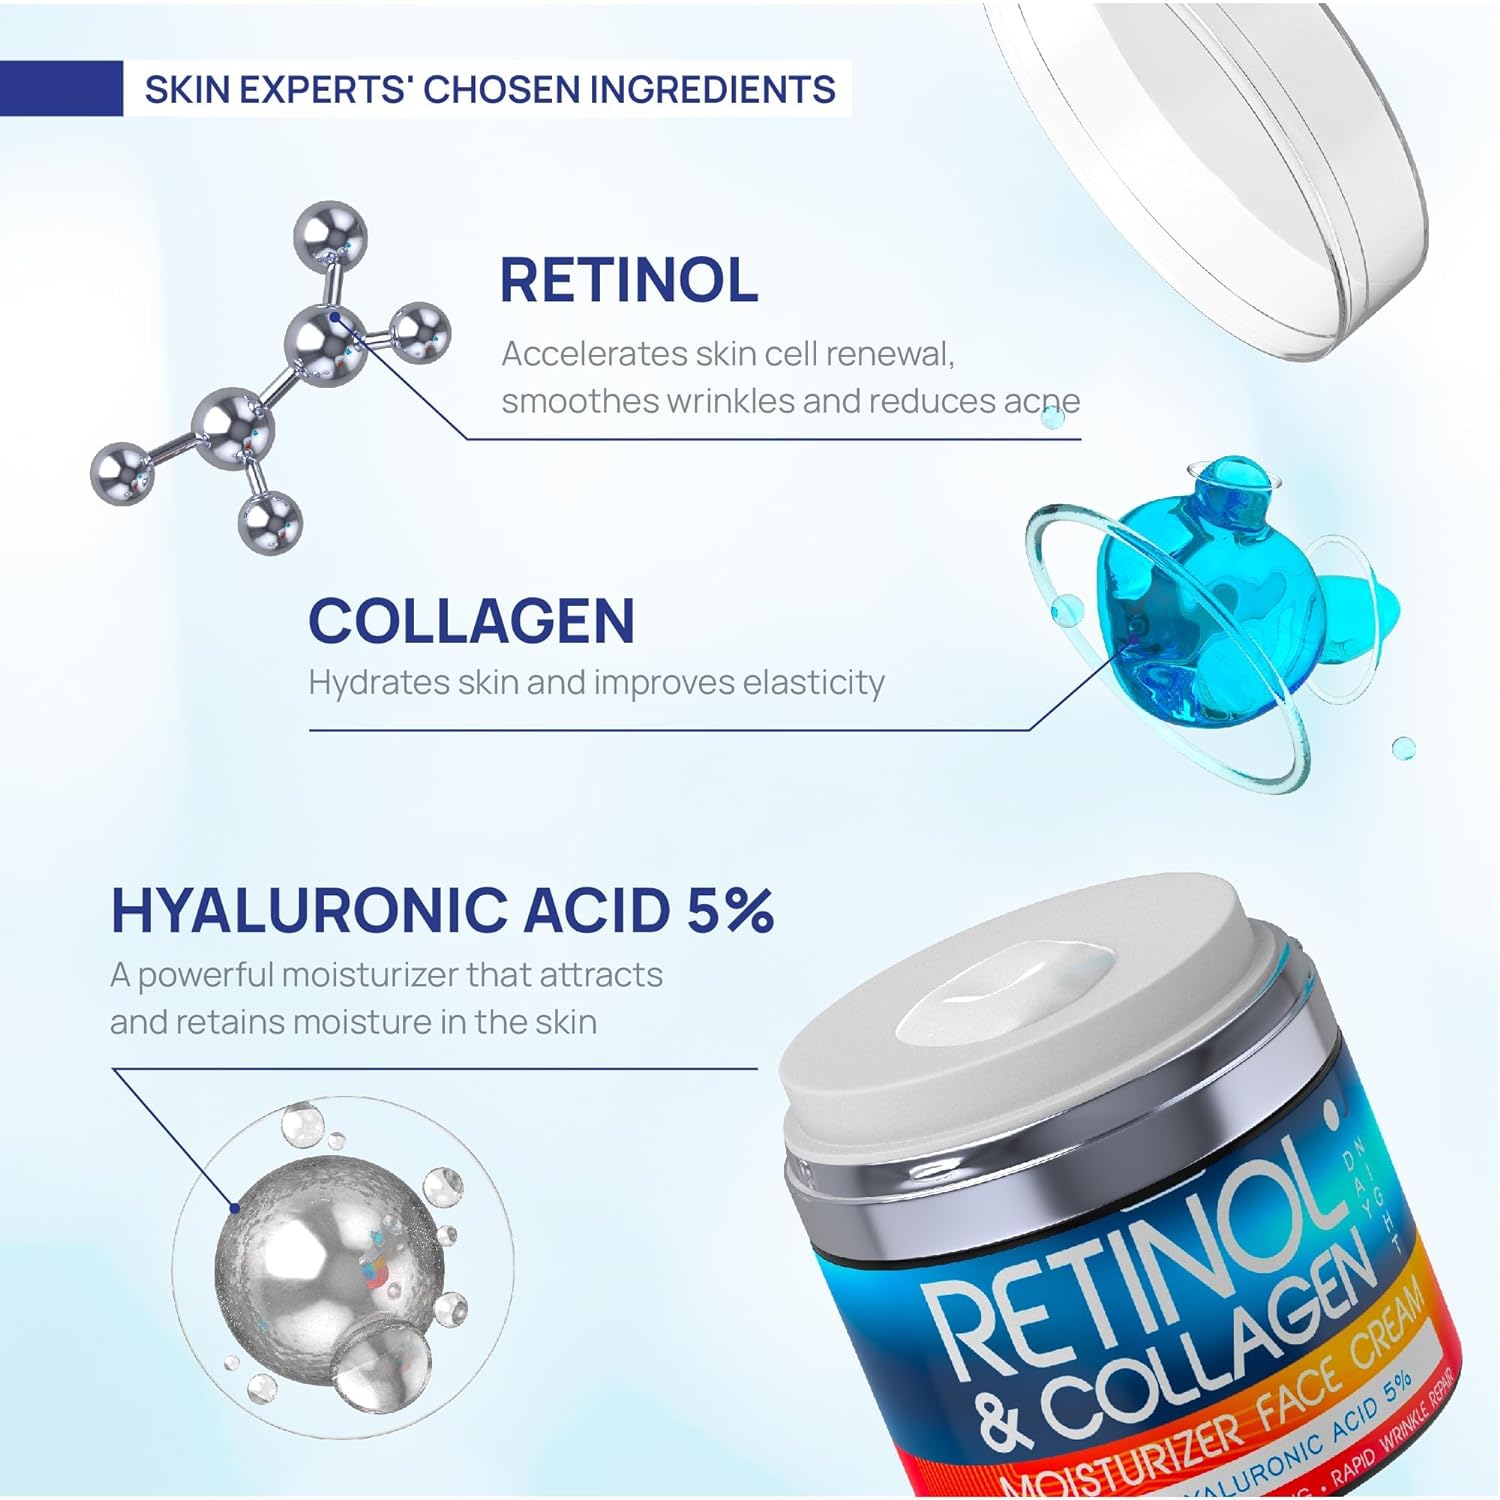 Wholesale prices with free shipping all over United States Retinol Cream for Face - Collagen and Retinol Moisturizer with Hyaluronic Acid, Day-Night Anti-Aging Moisturizer for Women, Men, Collagen Cream for Face Reduces Wrinkles, Dryness, 1.85 Oz - Steven Deals